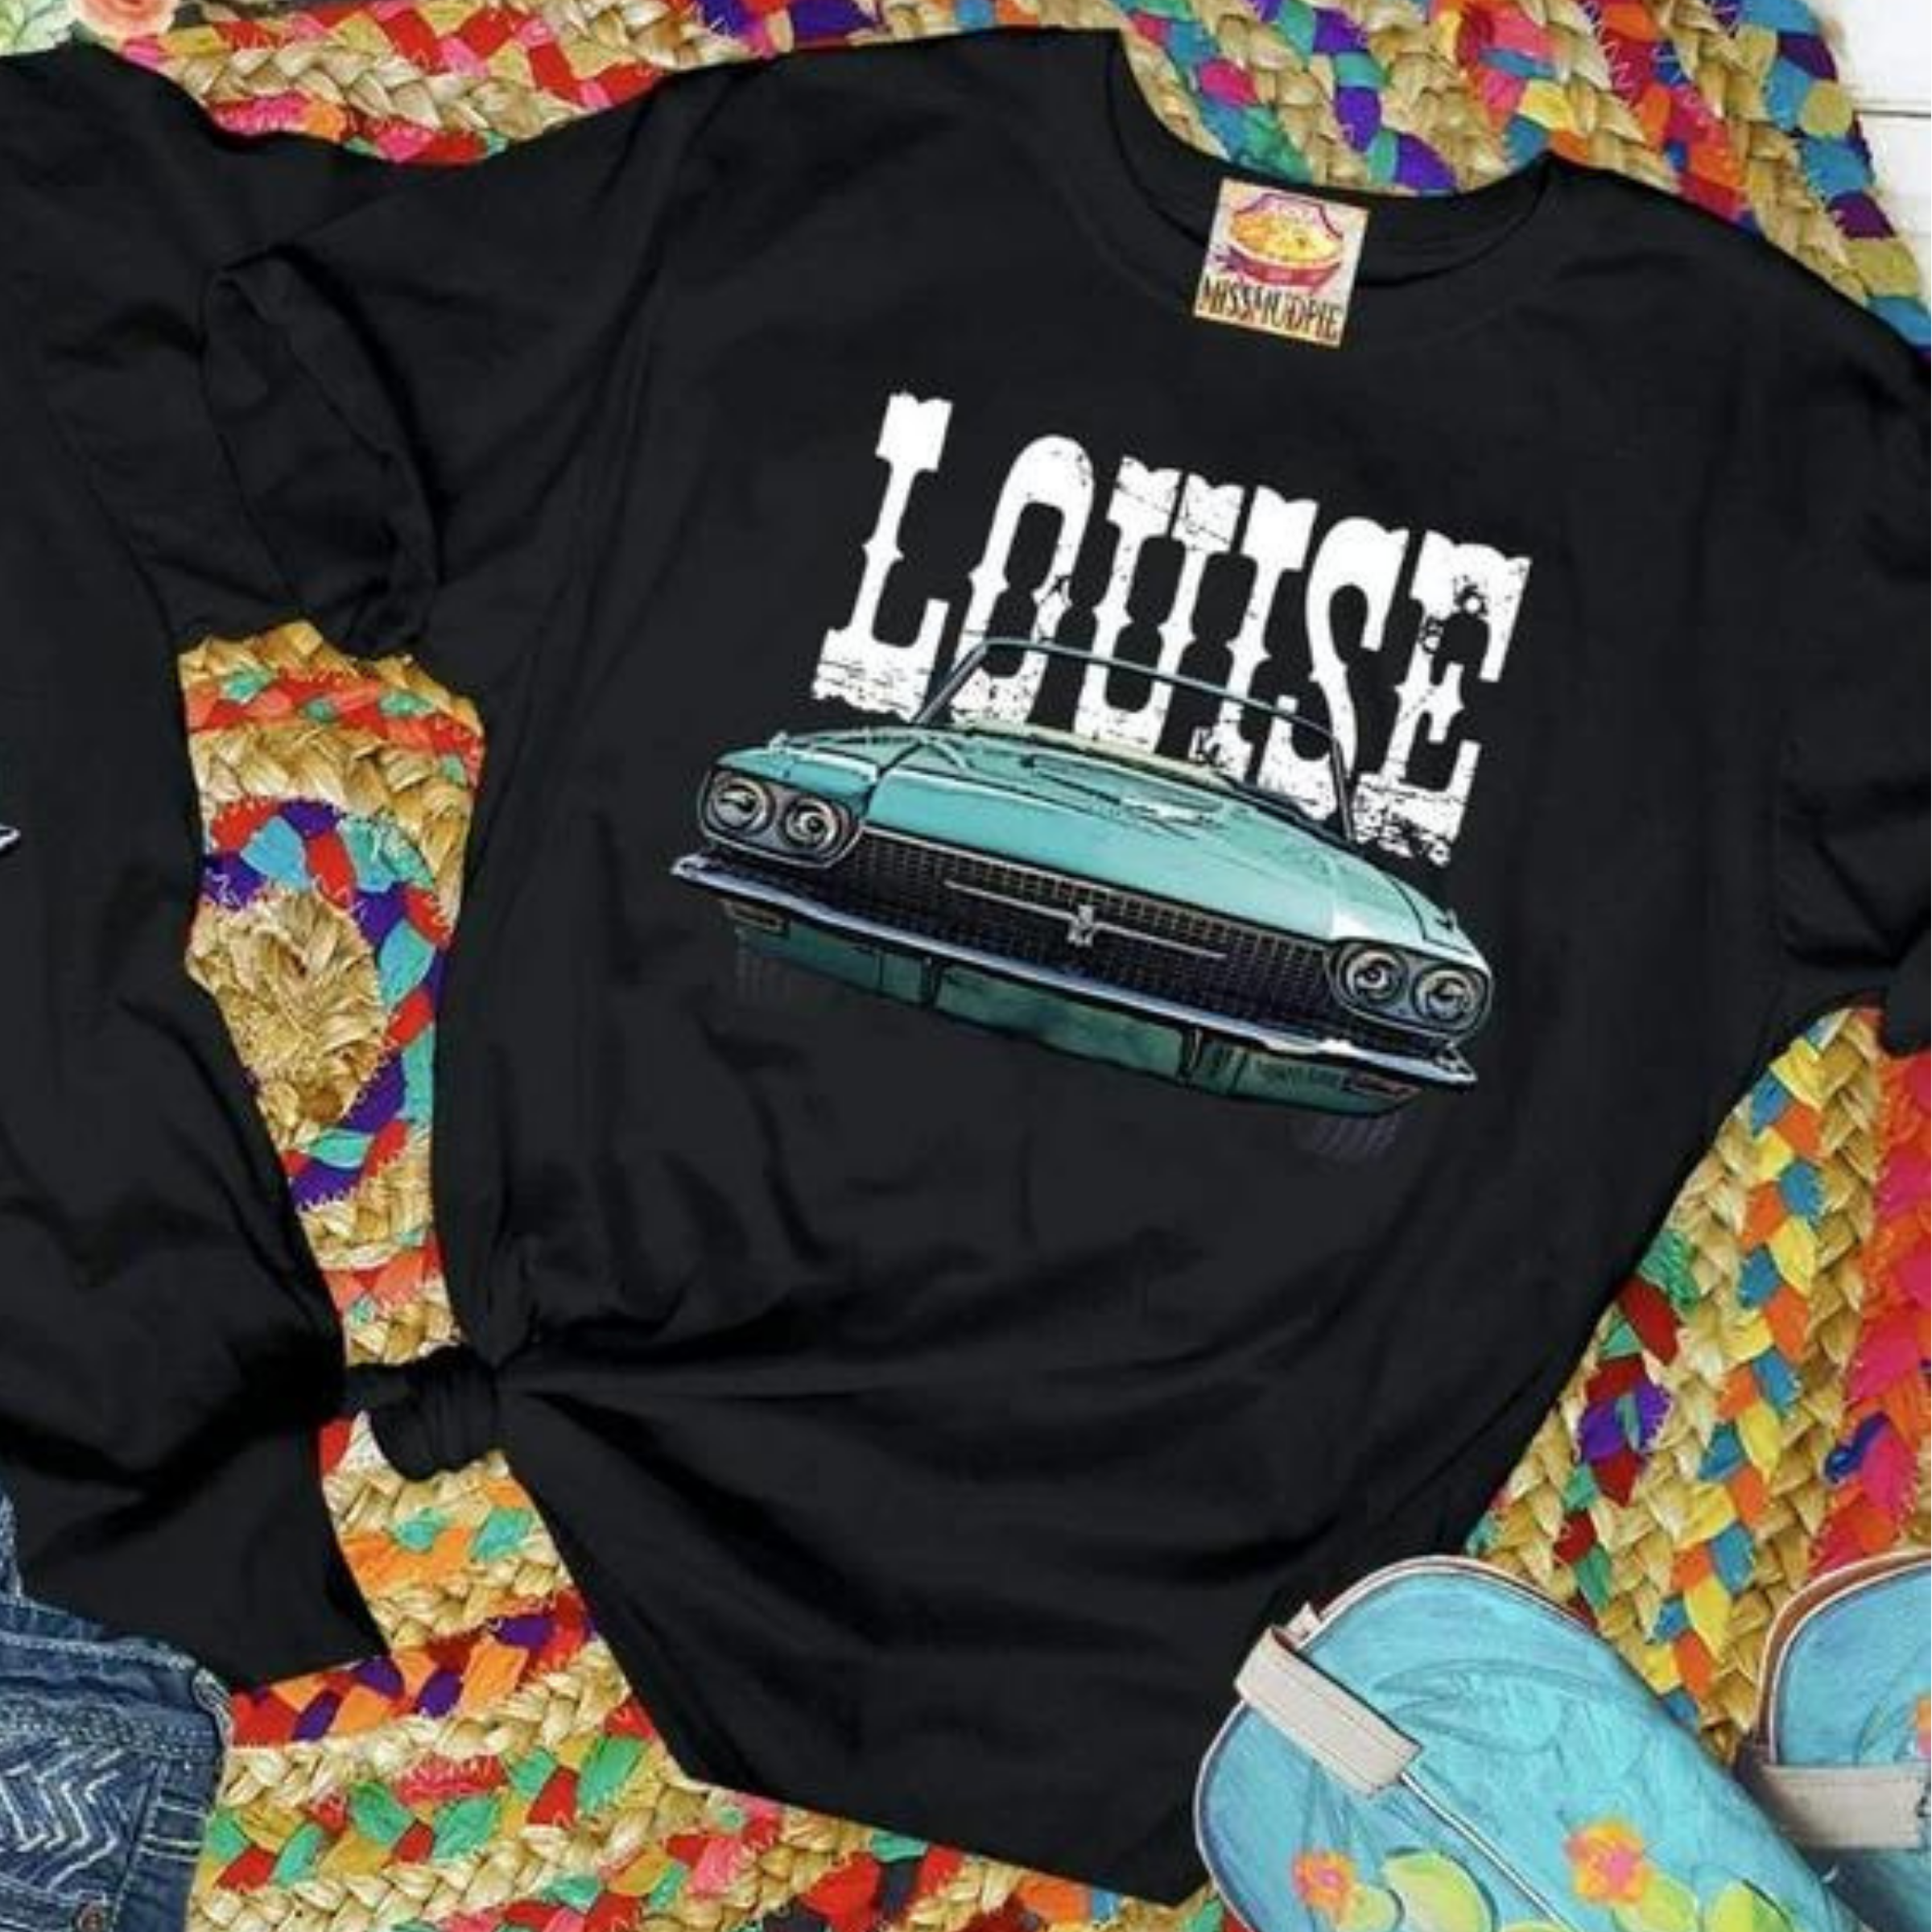 A black tee shirt folded into a rectangle exposing the vintage car graphic that says "Louise" above. Pictured with a turquoise necklace on a serape rug.